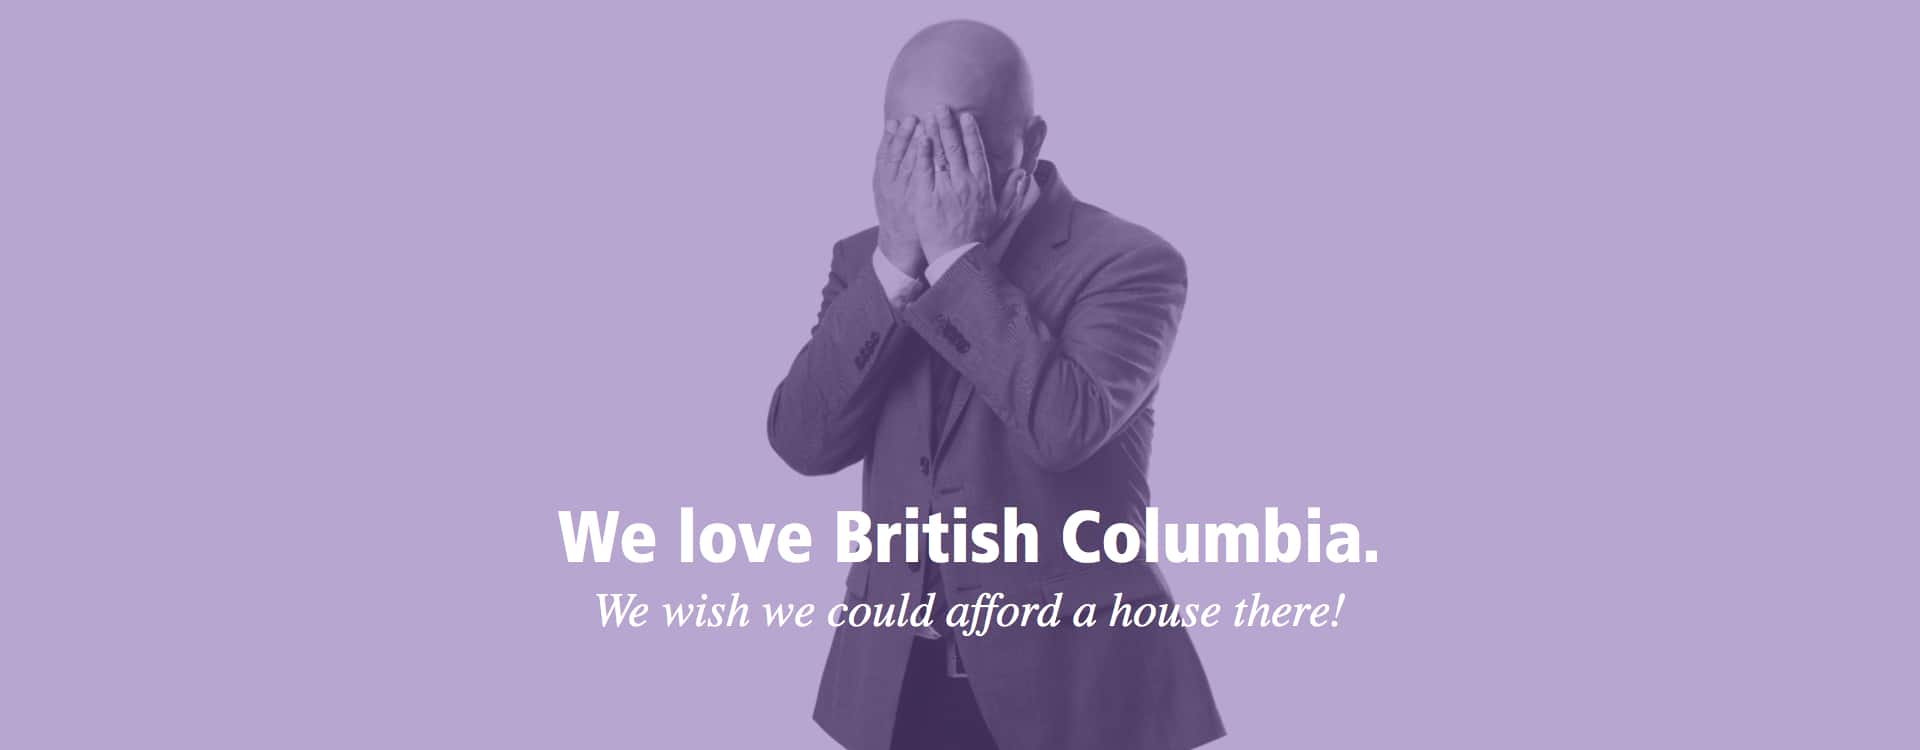 We love British Columbia. We wish we could afford a house there!